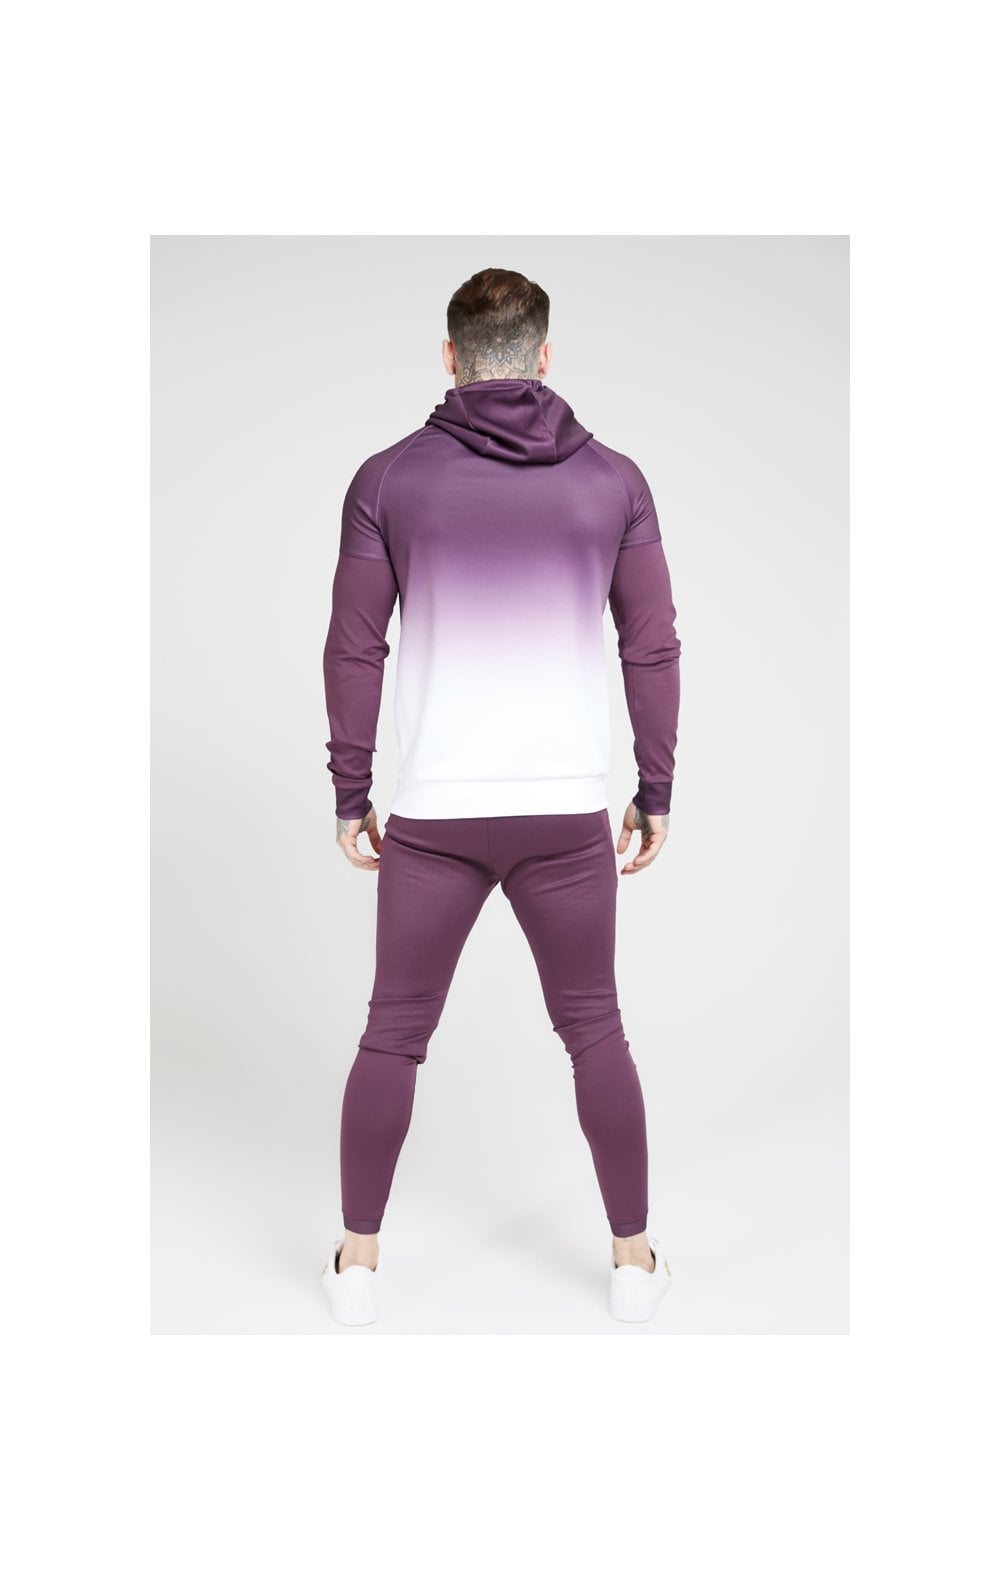 Load image into Gallery viewer, SikSilk Vapour Hybrid Sleeve Tape Hoodie - Rich Burgundy Fade (6)